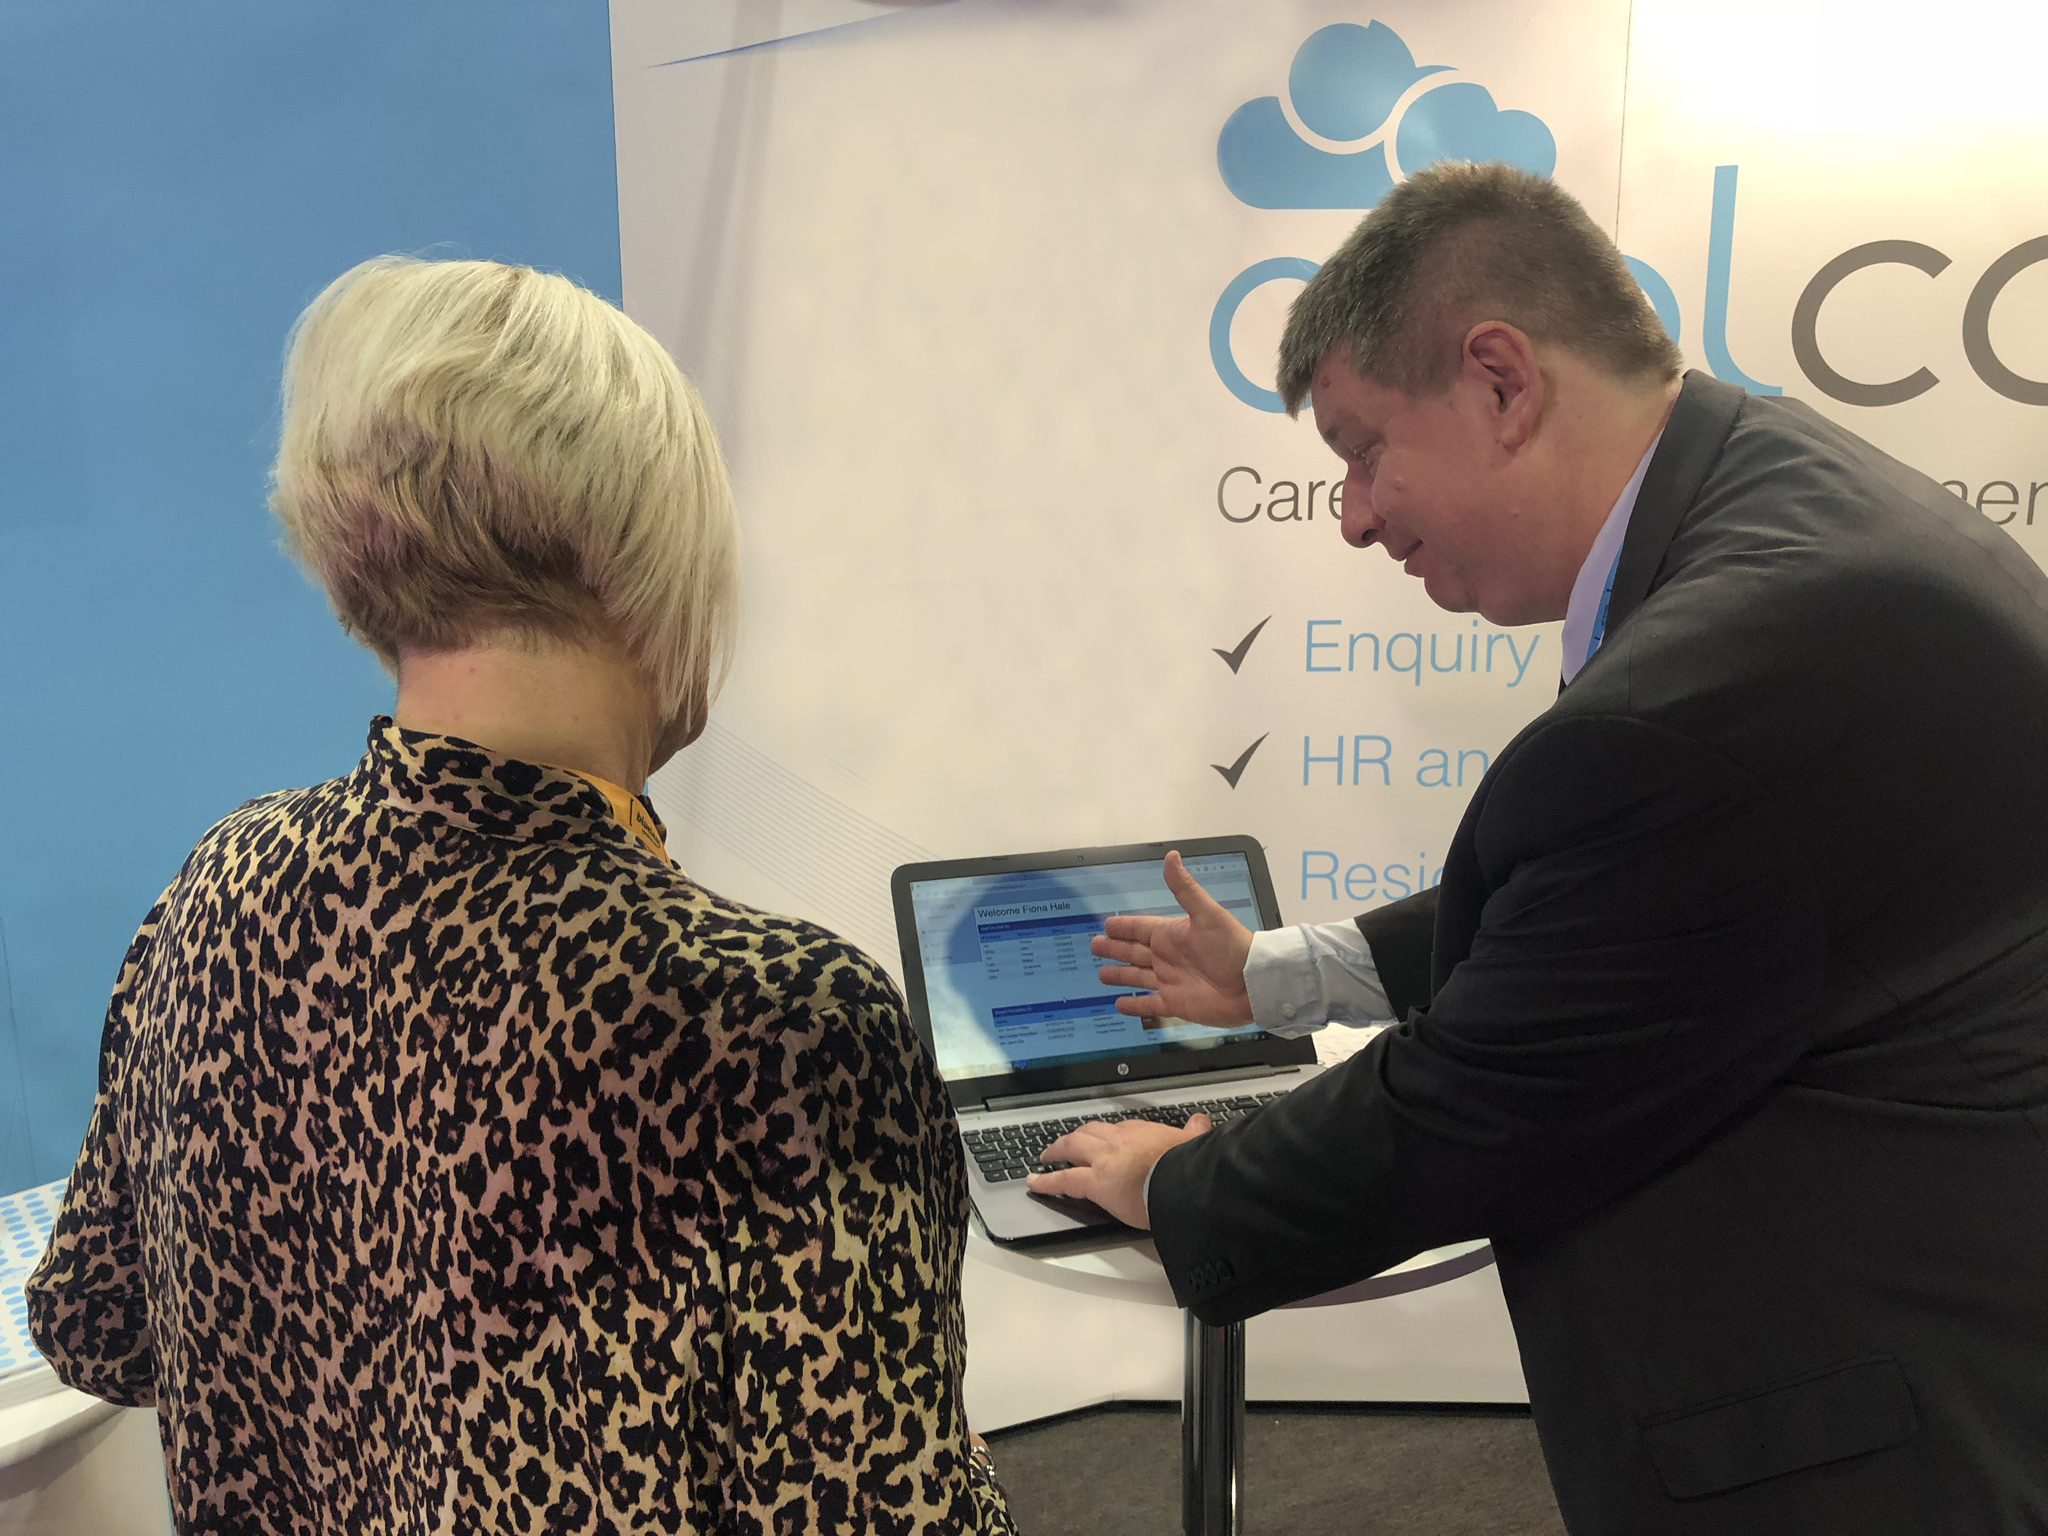 care show reflections: care tech is booming.